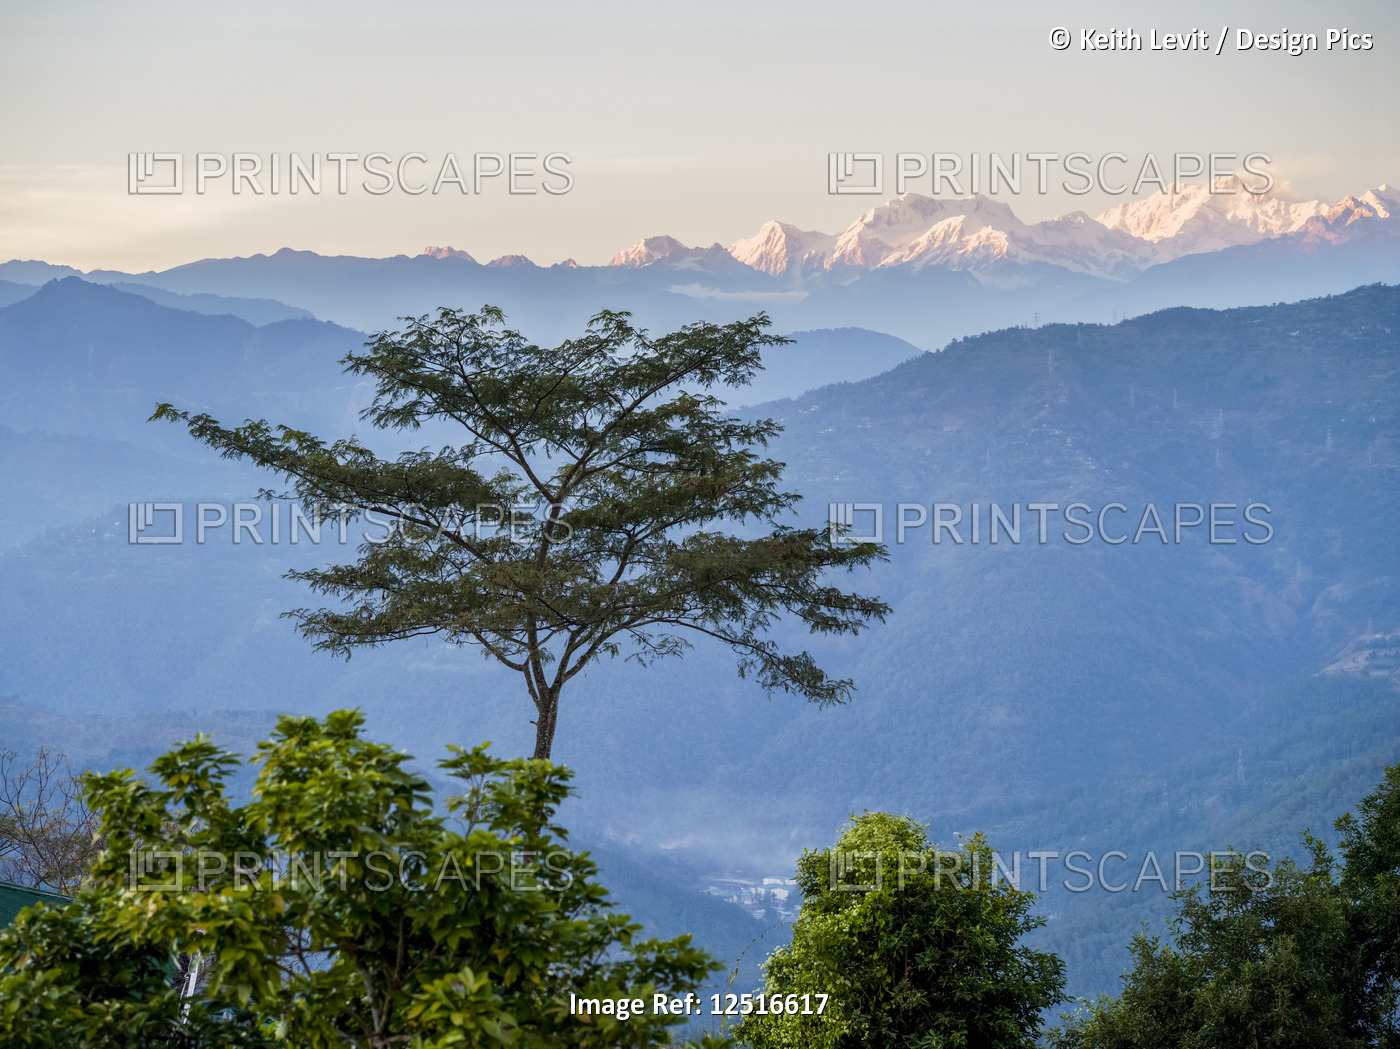 View of the sunlit peaks of the Himalayas from the Glenburn Tea Plantation and ...